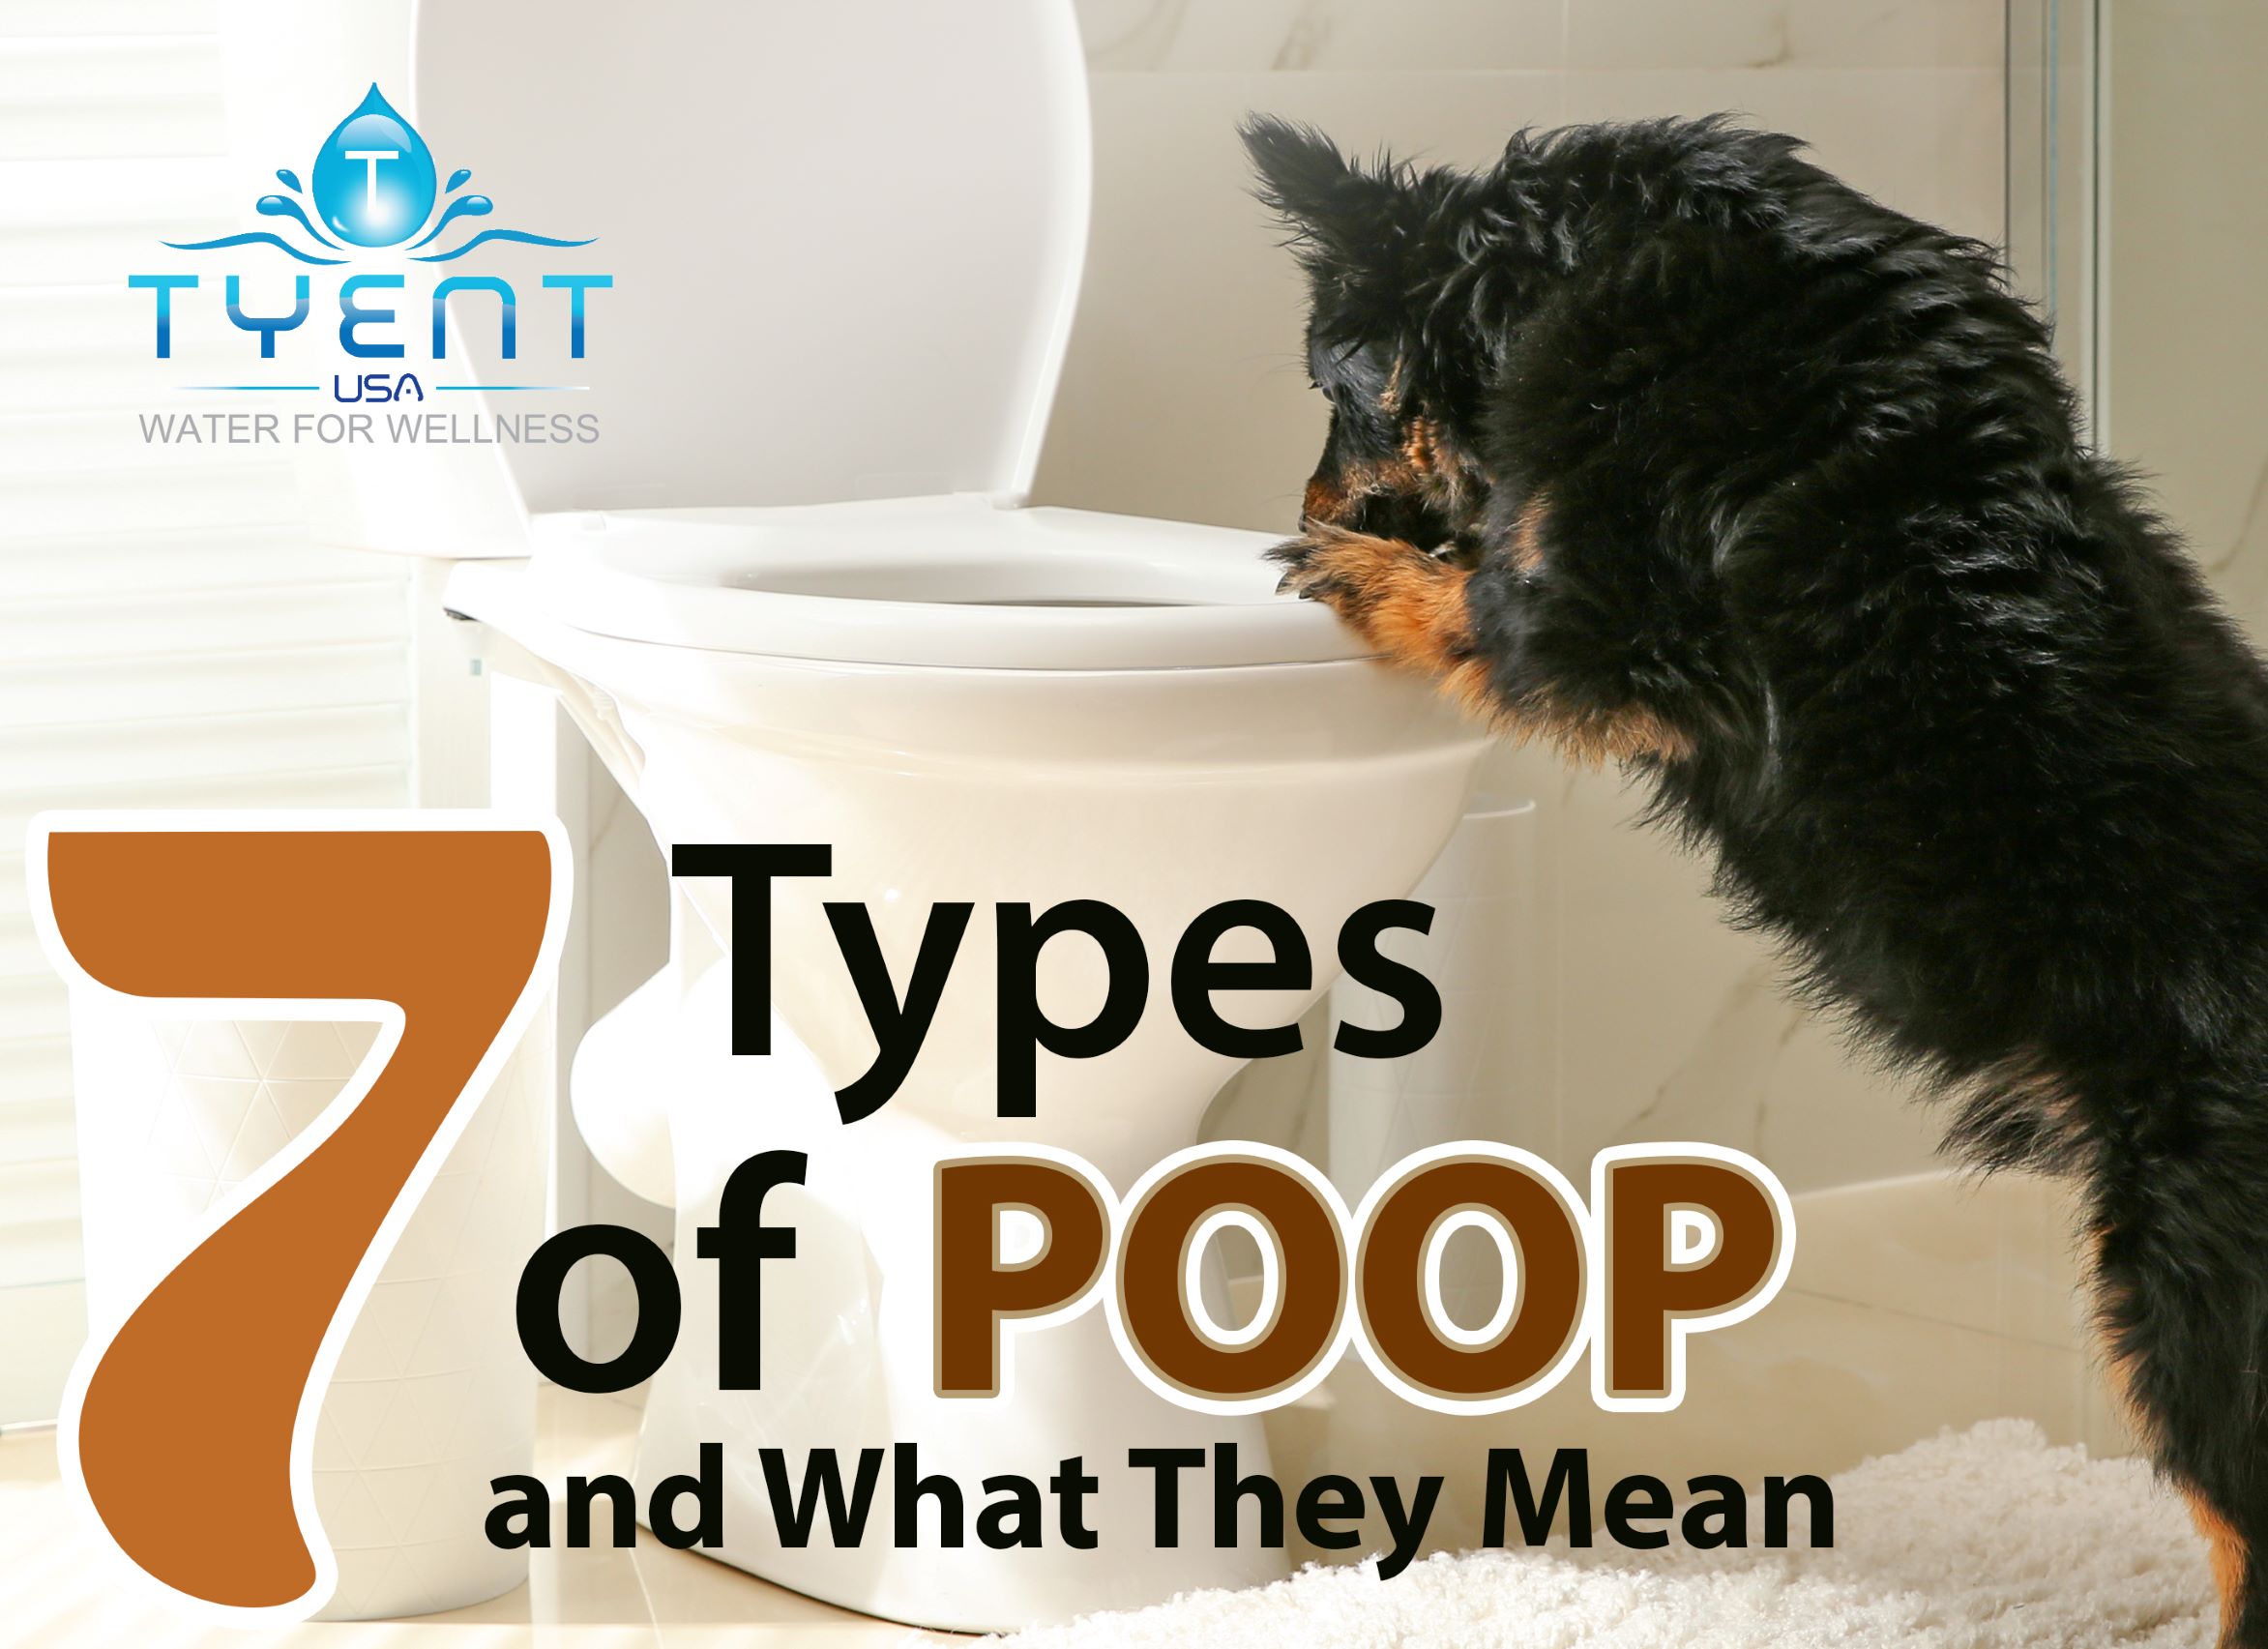 7 Types of Poop and What They Mean